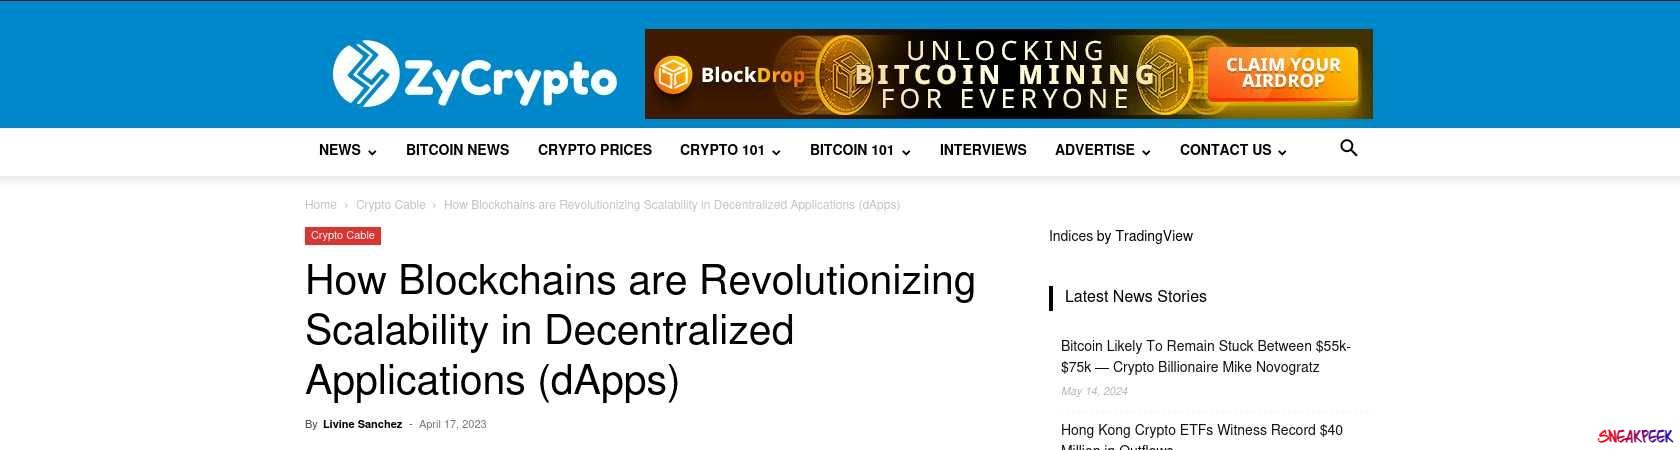 Read the full Article:  ⭲ How Blockchains are Revolutionizing Scalability in Decentralized Applications (dApps)